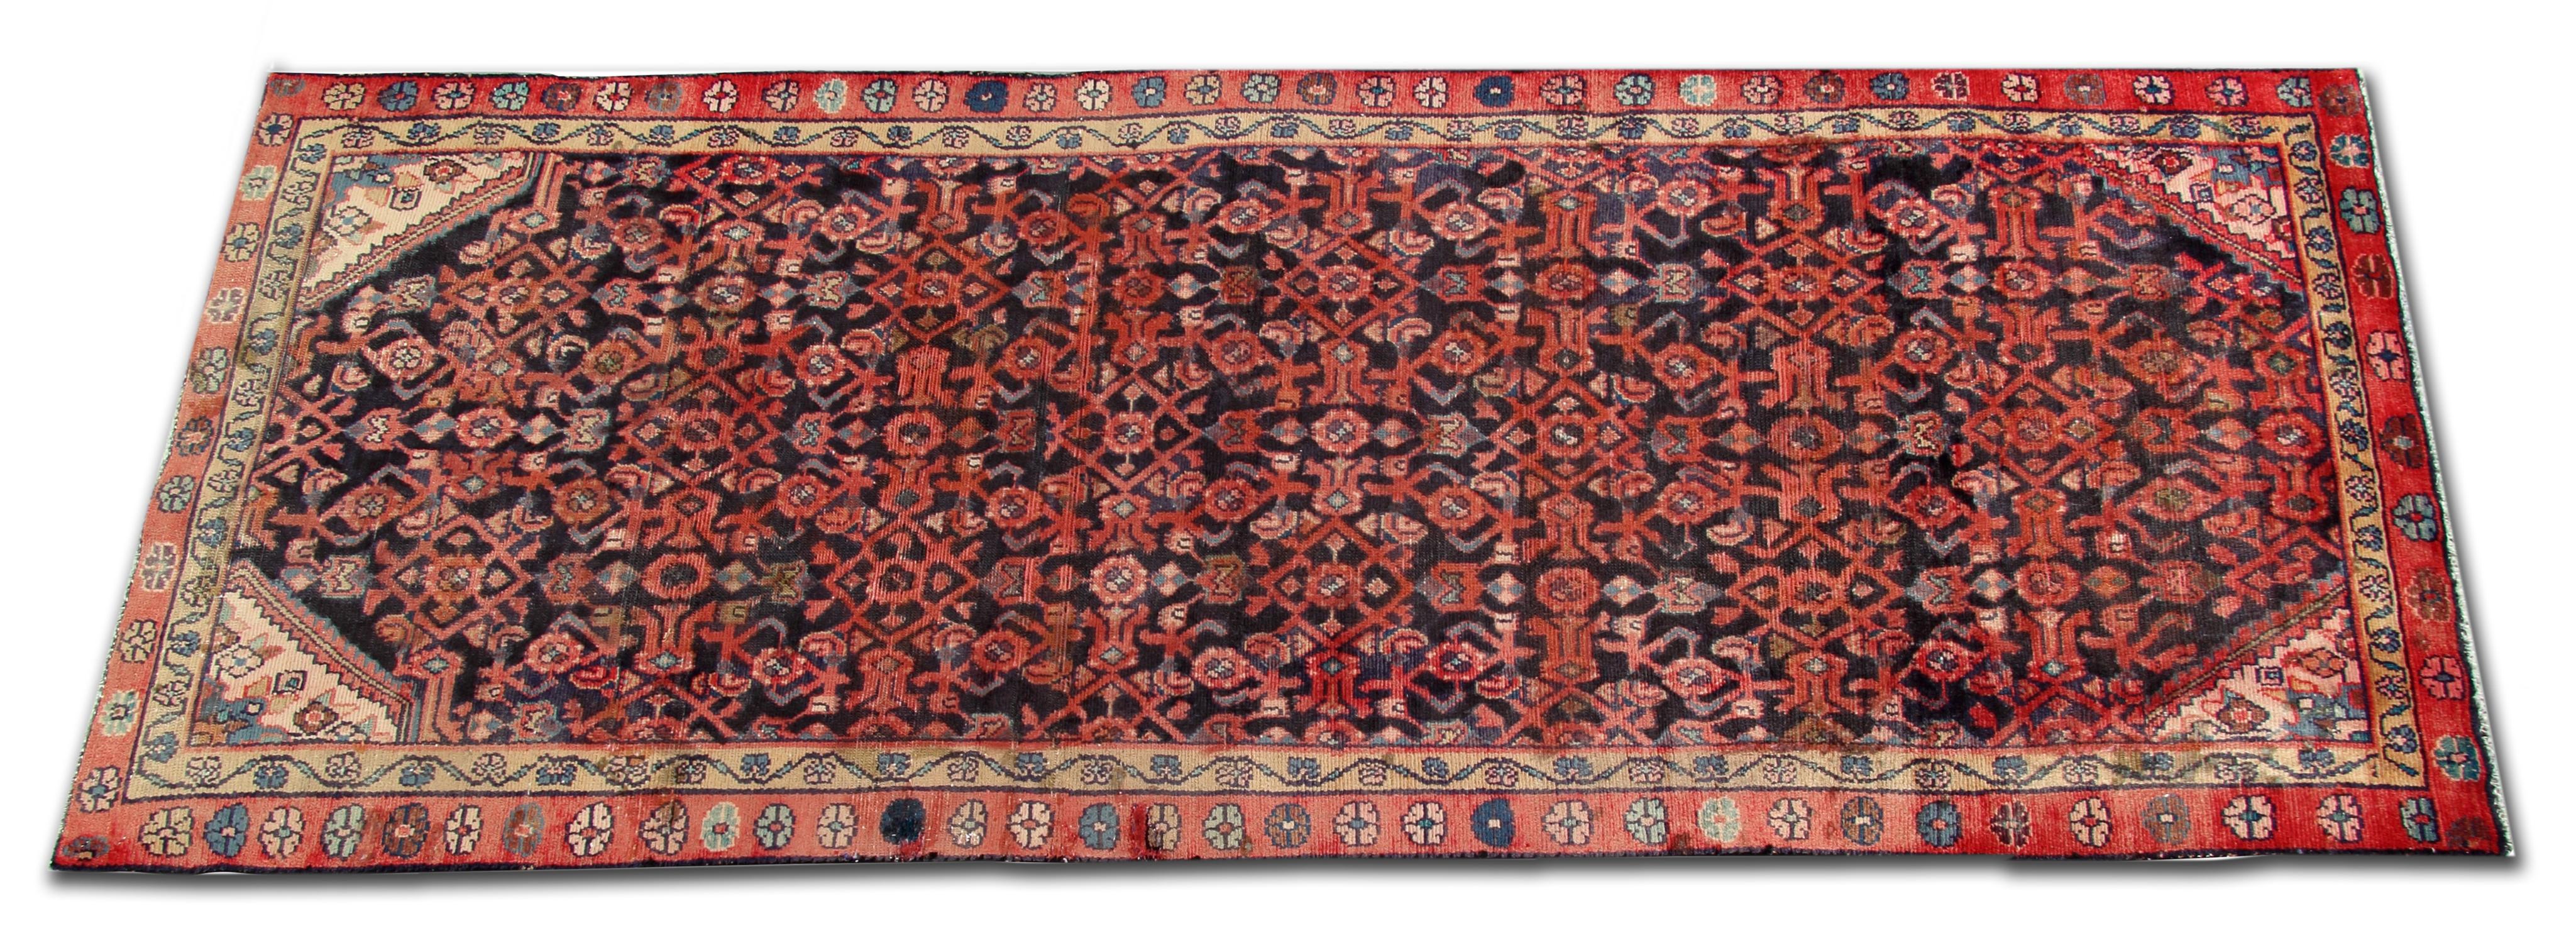 Are you in the market for a new vintage runner rug? Then look no further this fine handwoven wool runner rug has been woven with a bold central repeating pattern design in accents of pink and red on deep blue background. This is then framed by a